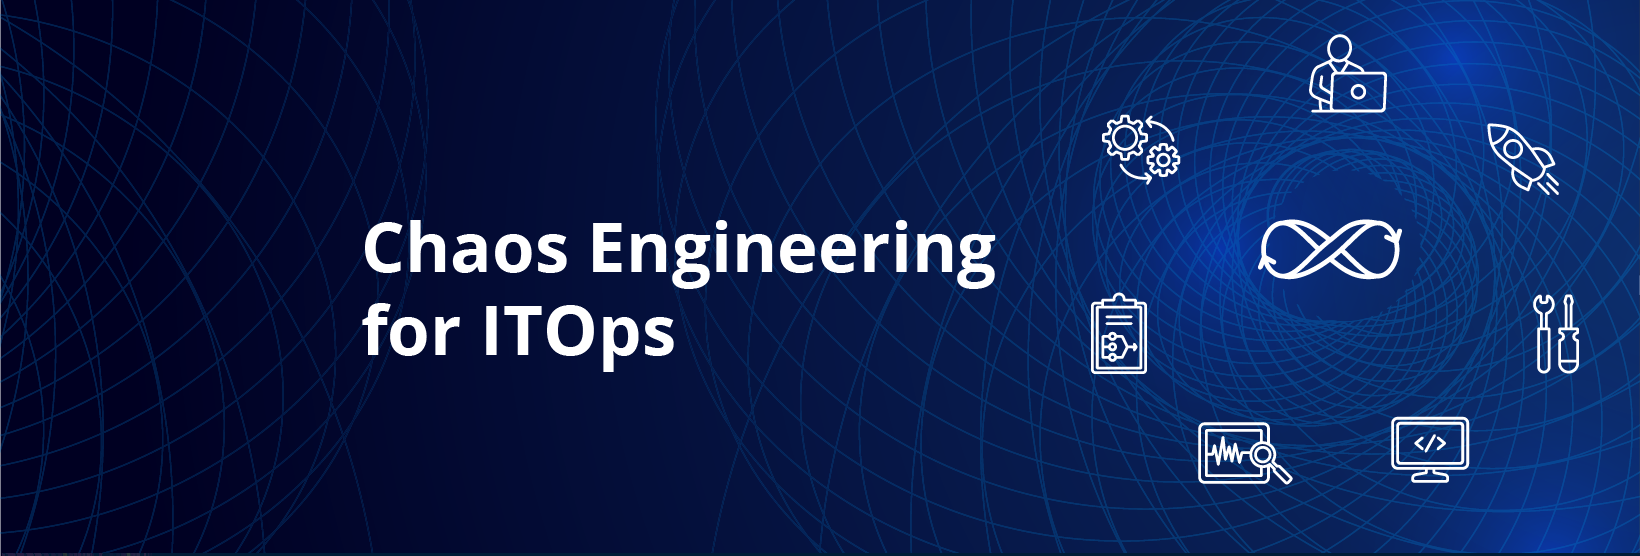 Chaos Engineering for ITOps